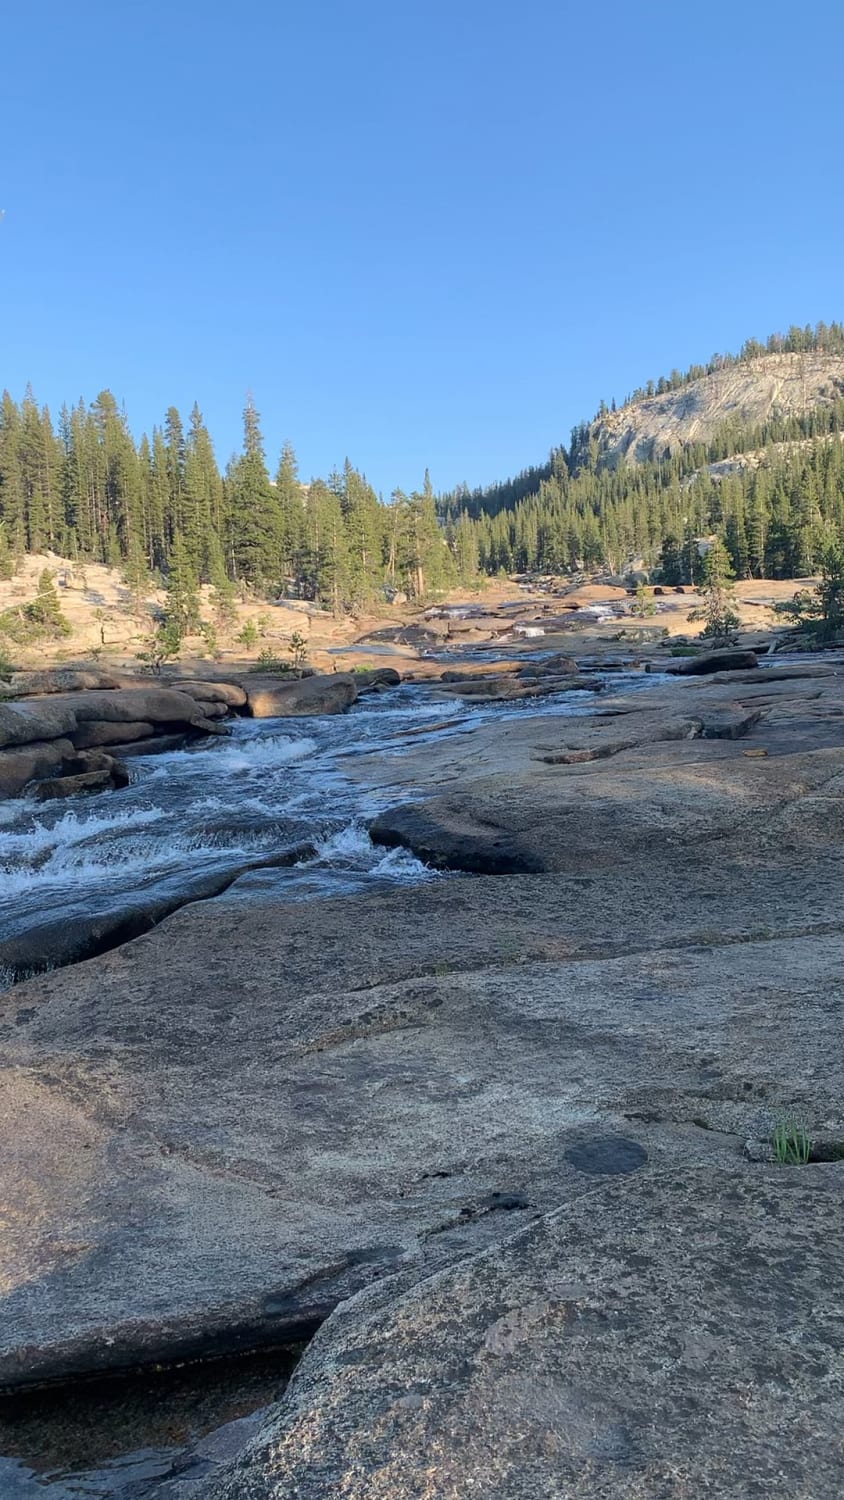 Golden hour in the Tuolumne River valley - backpacking in Yosemite National Park.